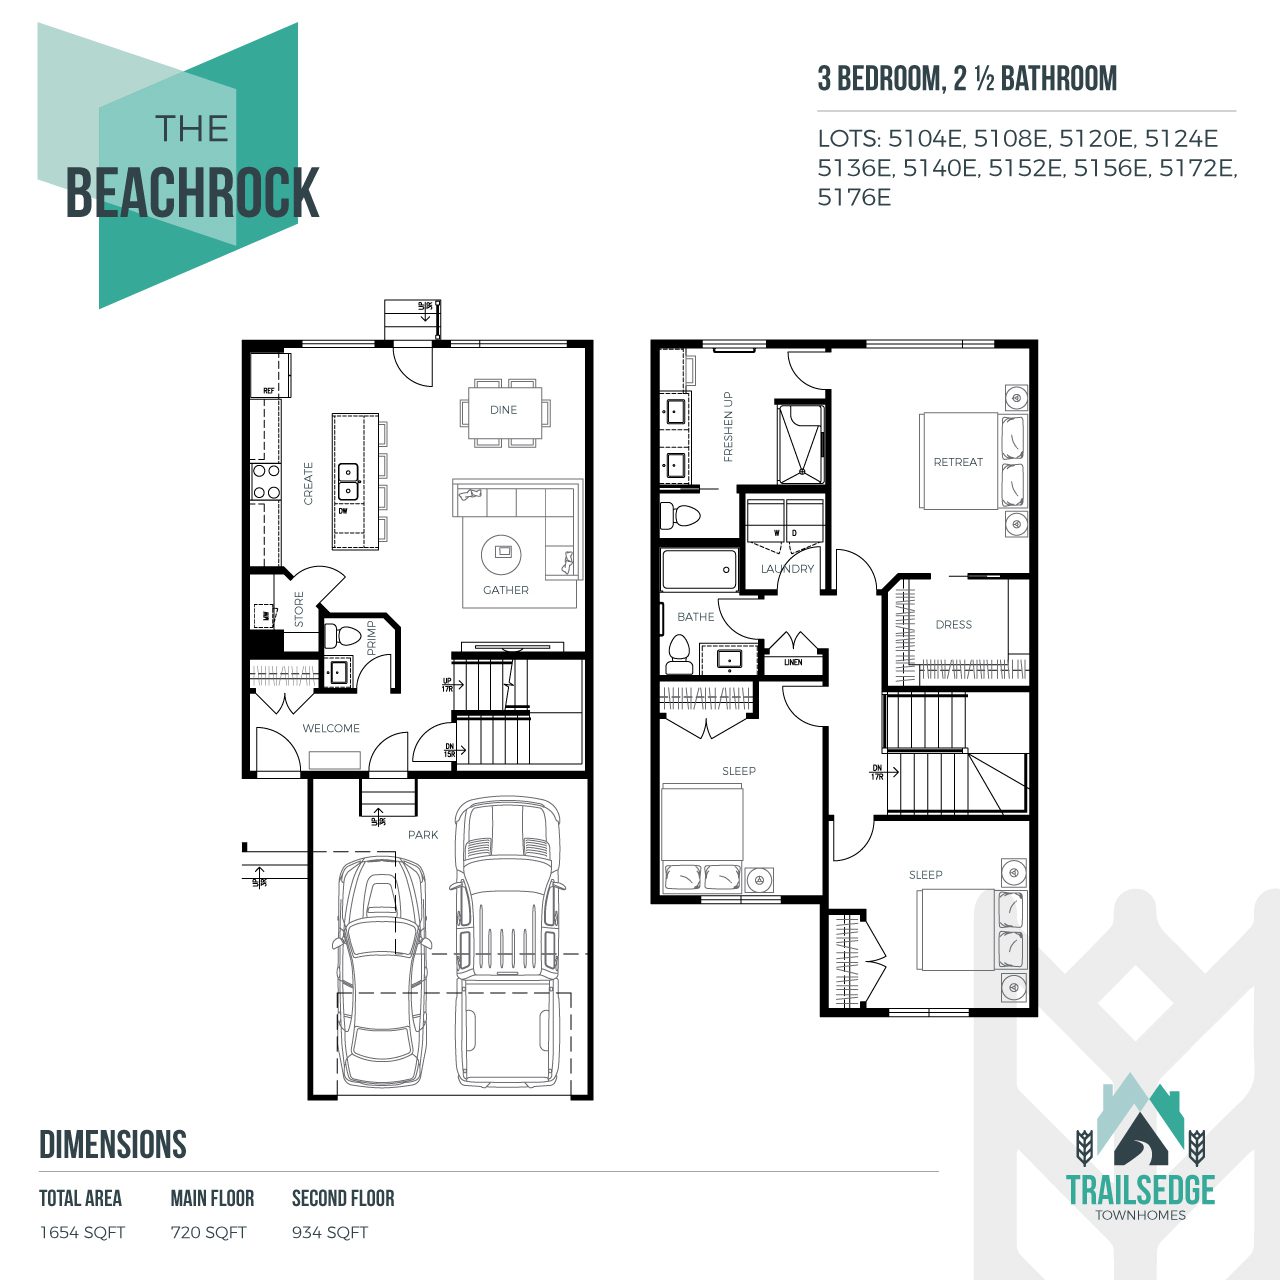 Shows the townhome floorplan layout for the Beachrock model. The main floor is an open-concept layout with living, dining and kitchen with corner pantry, there is a powder room off the entryway and an attached front-drive double-car garage. The second level shows three bedrooms, two bathrooms and upstairs laundry room.